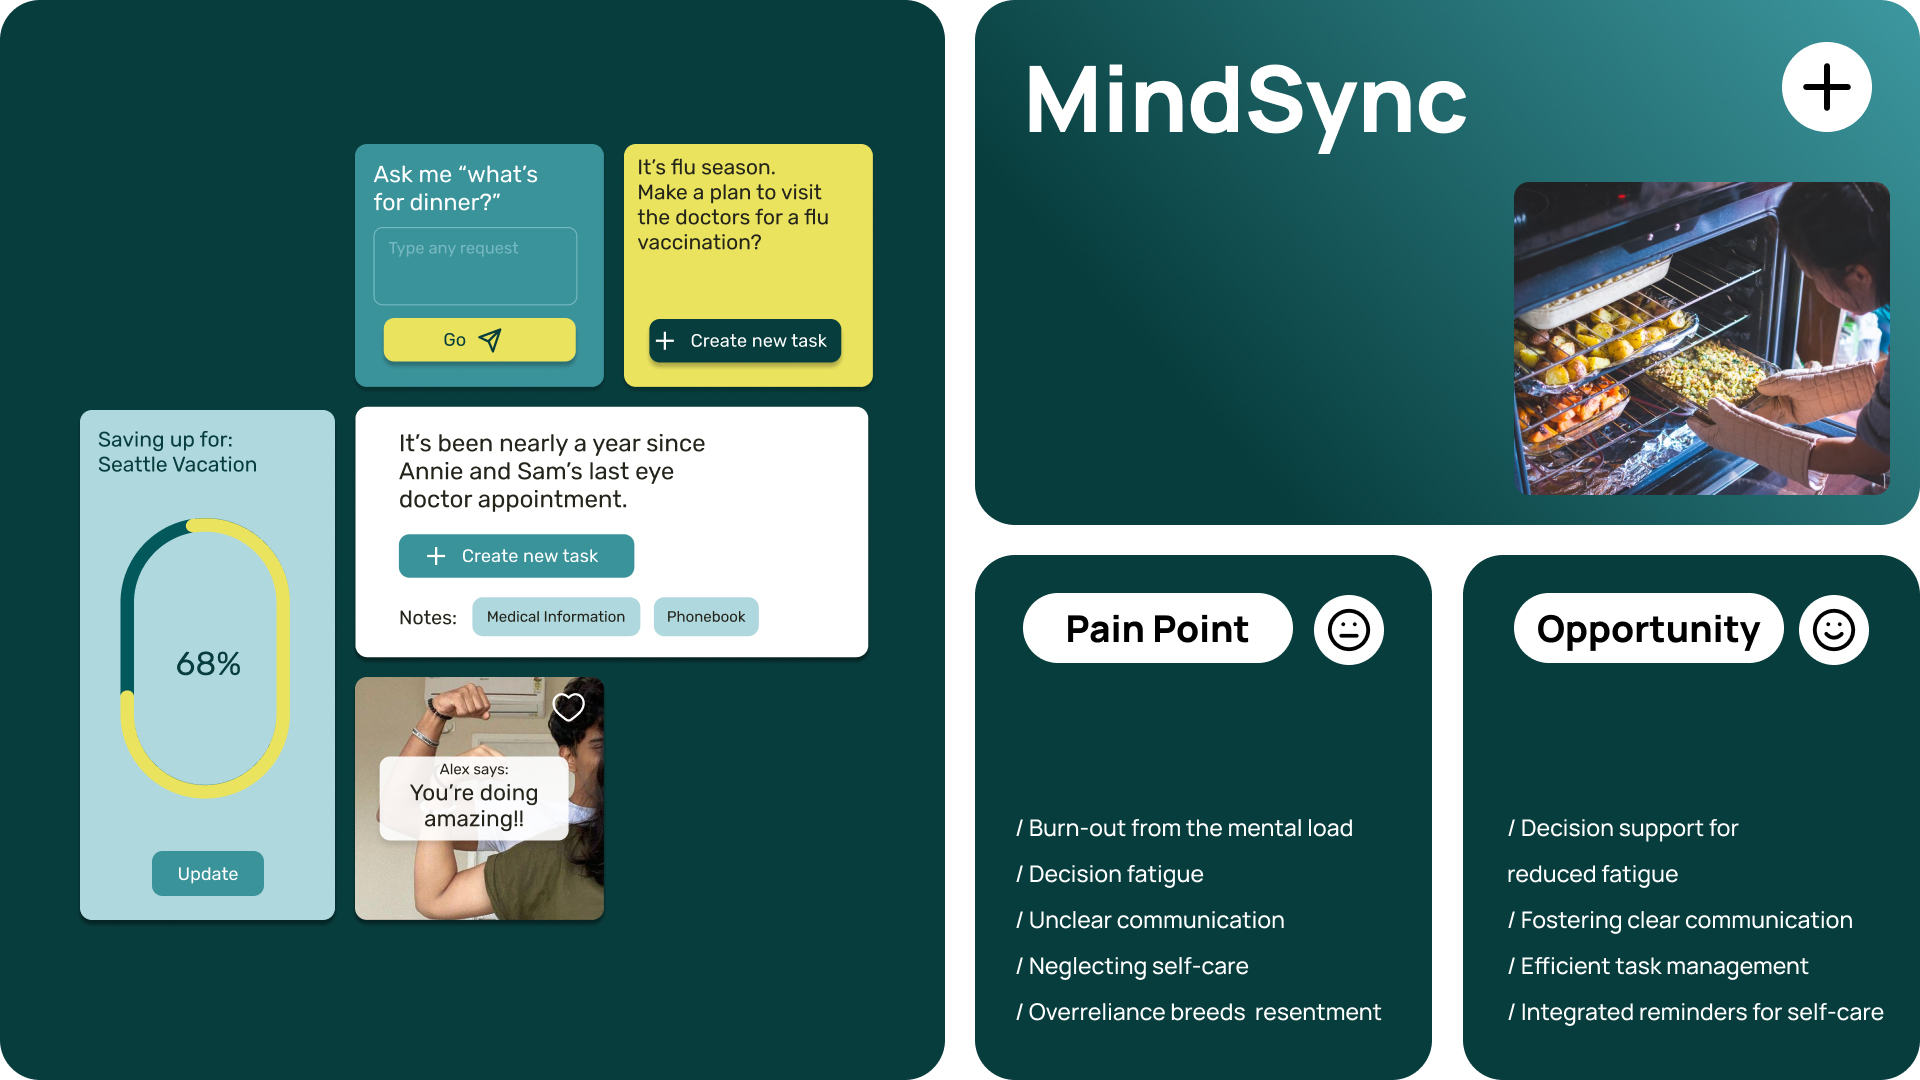 Summary of pain points and opportunity statements for Mindsync.